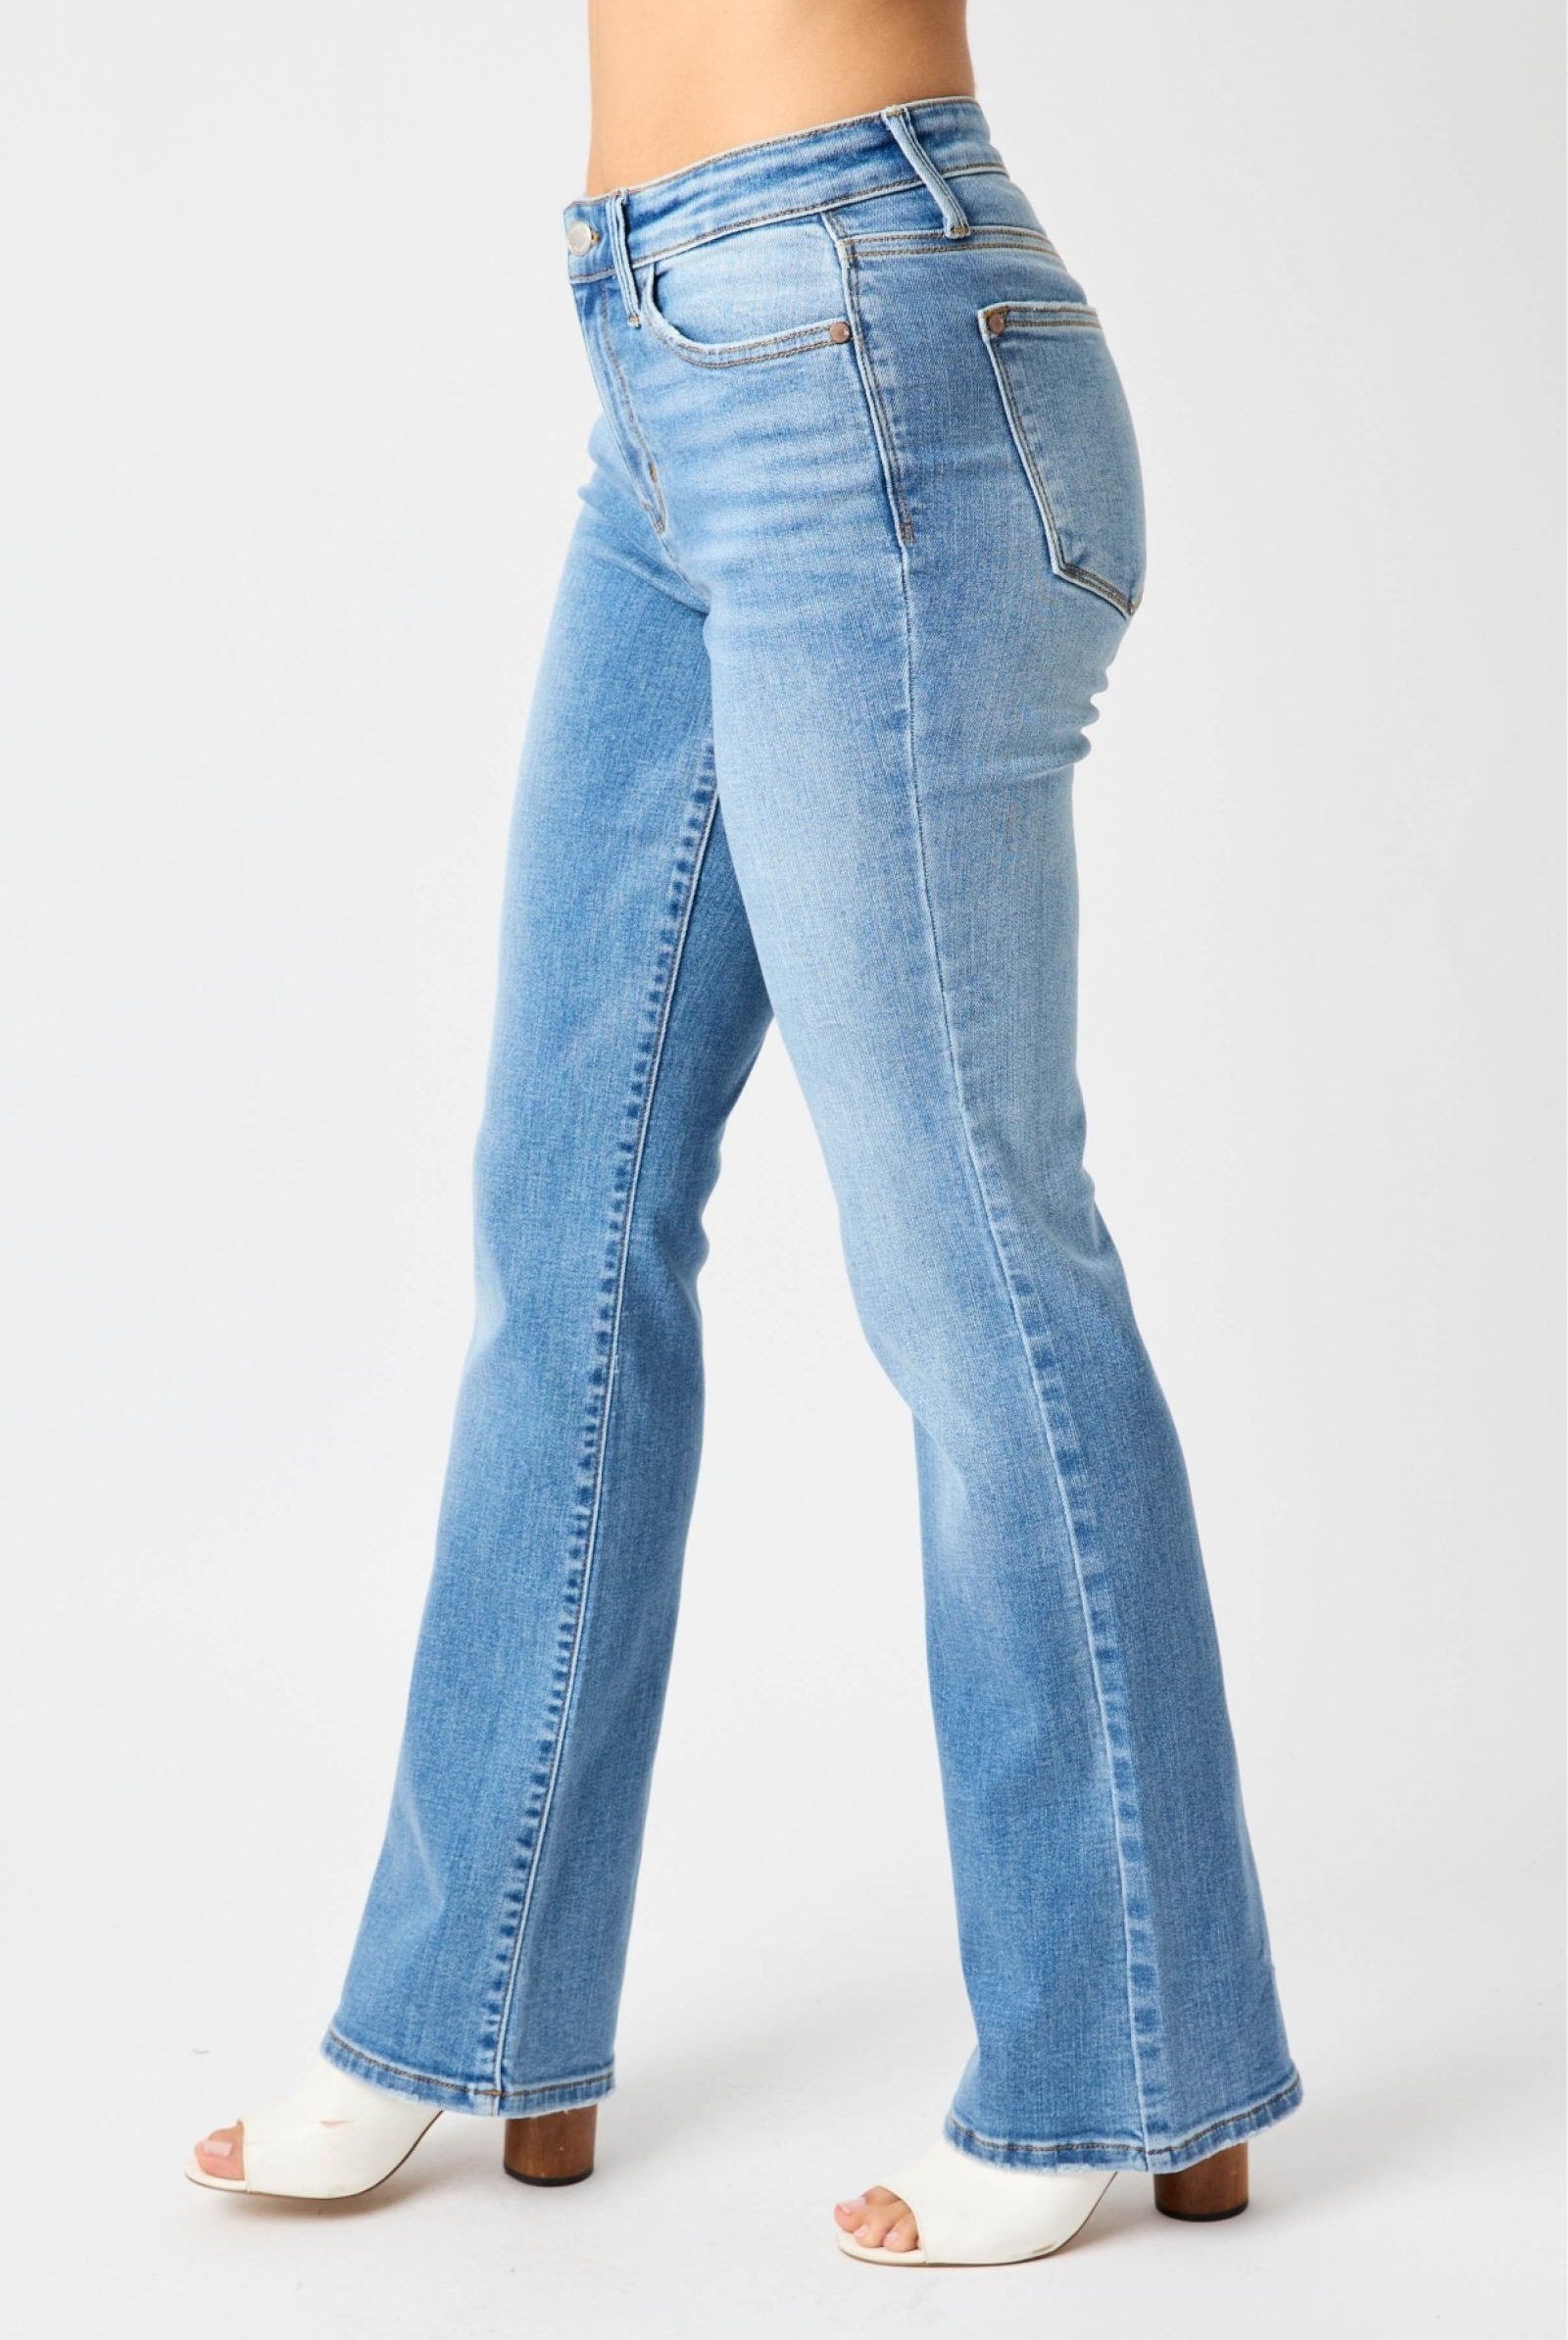 JUDY BLUE MID RISE BOOTCUT JEANS / STUFFOLOGY BOUTIQUE-Jeans-Judy Blue-Stuffology - Where Vintage Meets Modern, A Boutique for Real Women in Crosbyton, TX